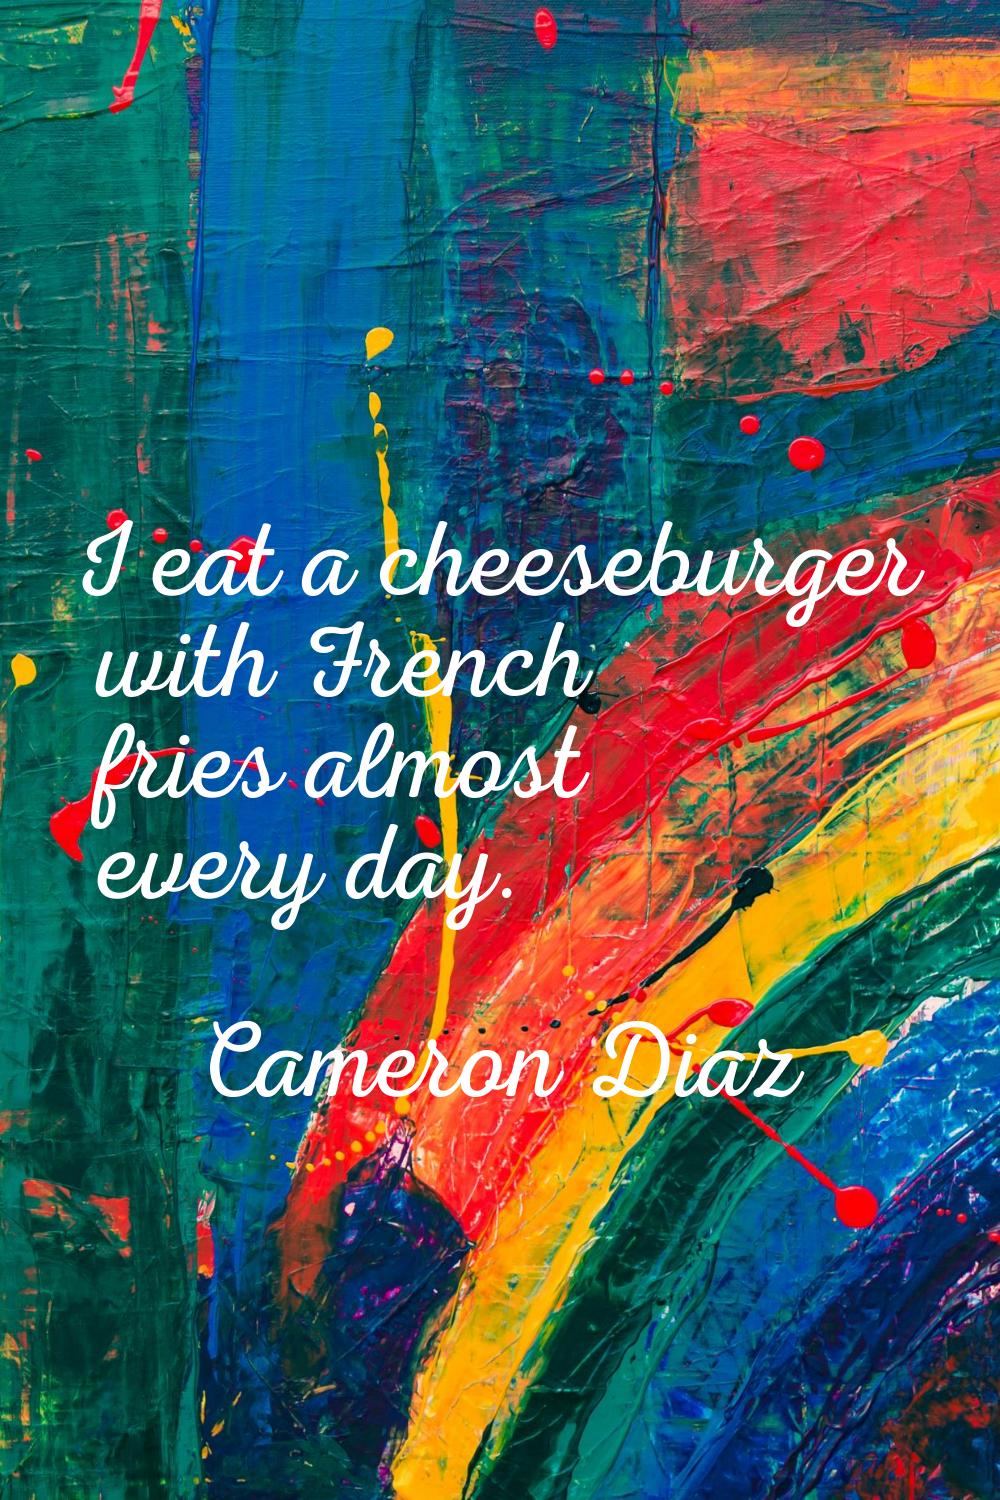 I eat a cheeseburger with French fries almost every day.